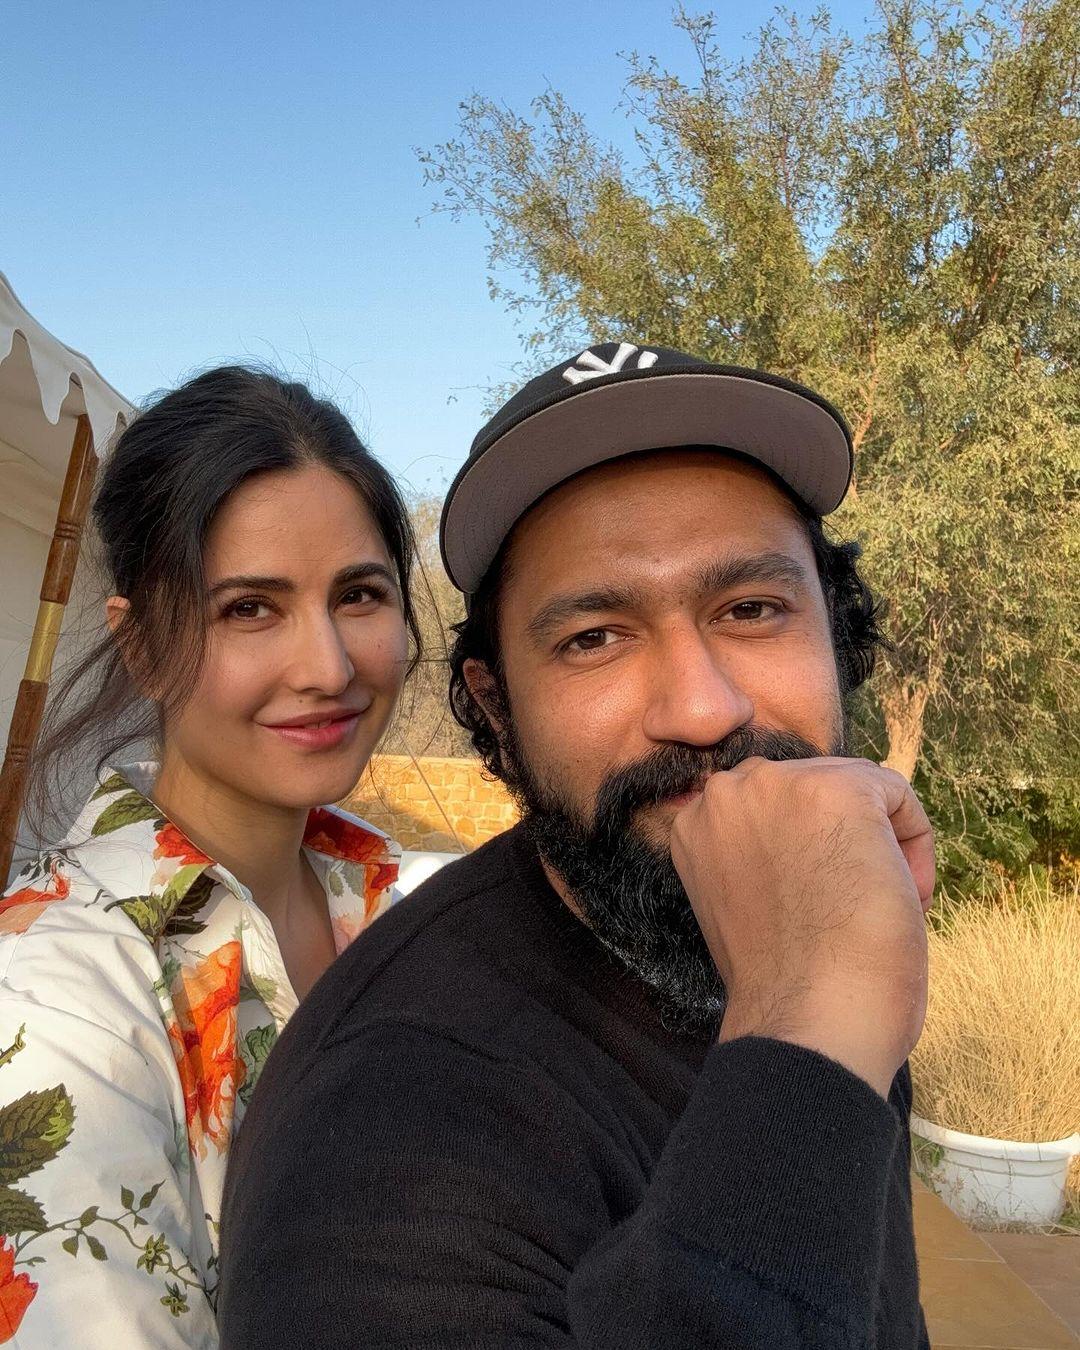 In this picture, Katrina and Vicky posed together for a loved-up photograph. Katrina is seen wearing a floral dress, while Vicky dons a crisp T-shirt